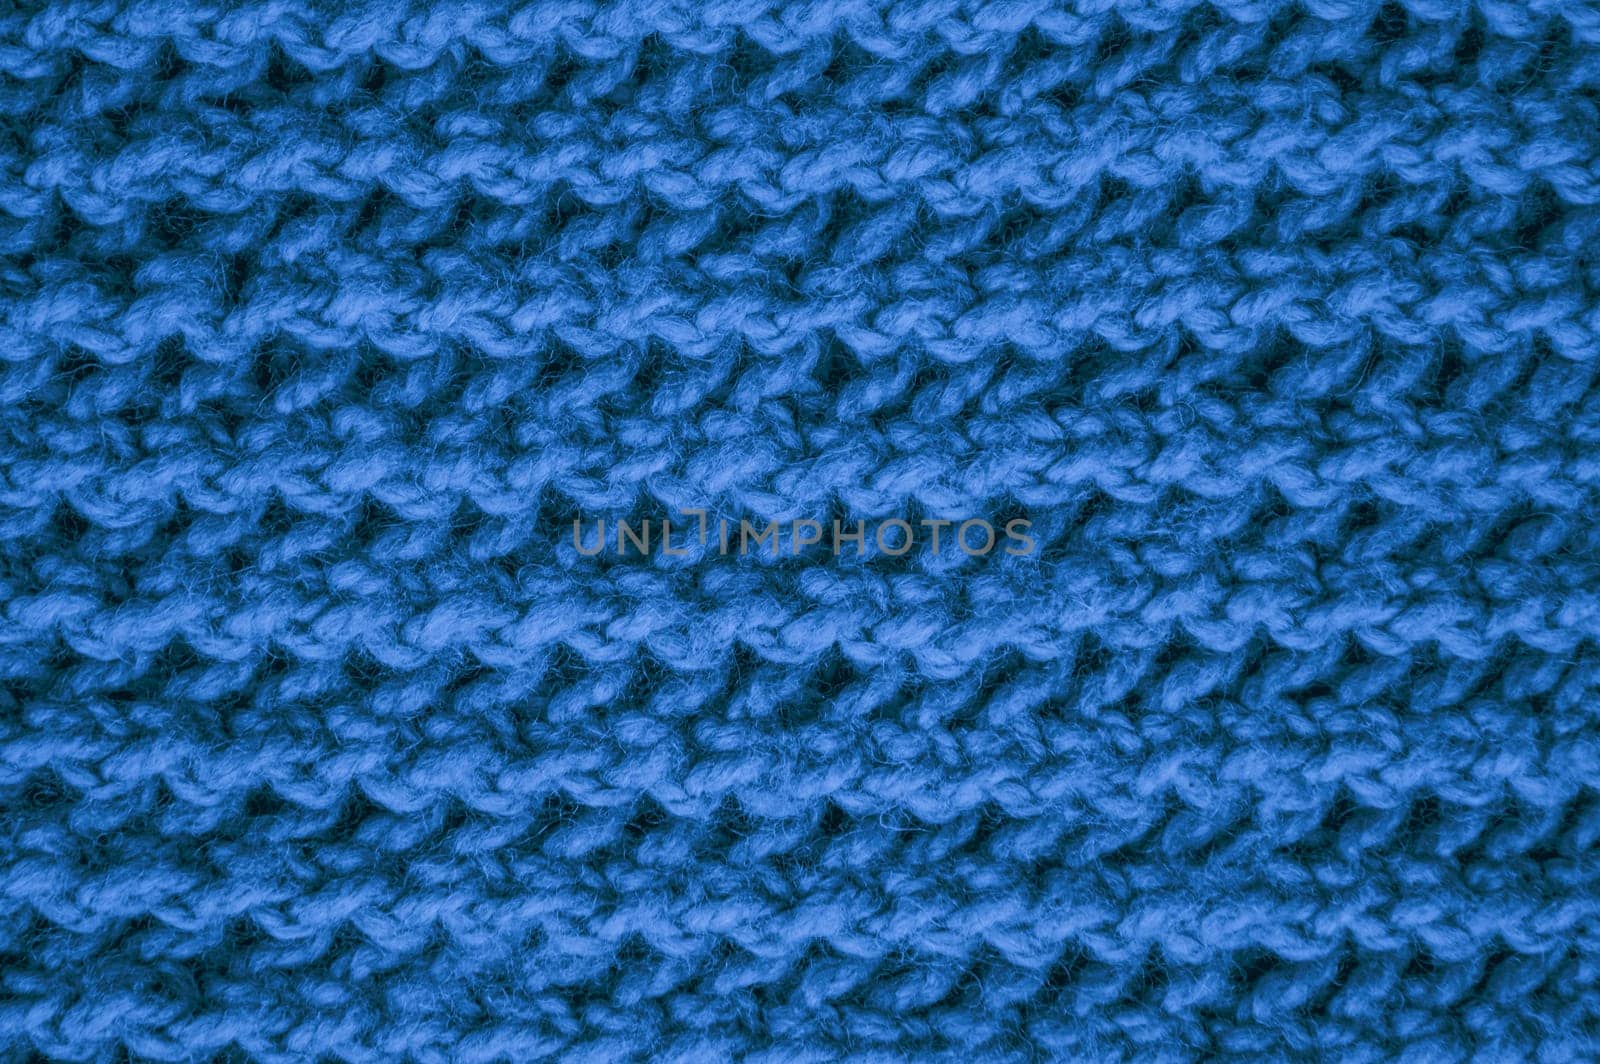 Knitted Blanket. Vintage Woven Design. Knitwear Christmas Background. Detail Knitted Blanket. Blue Fiber Thread. Nordic Winter Print. Closeup Plaid Material. Structure Knitted Sweater.